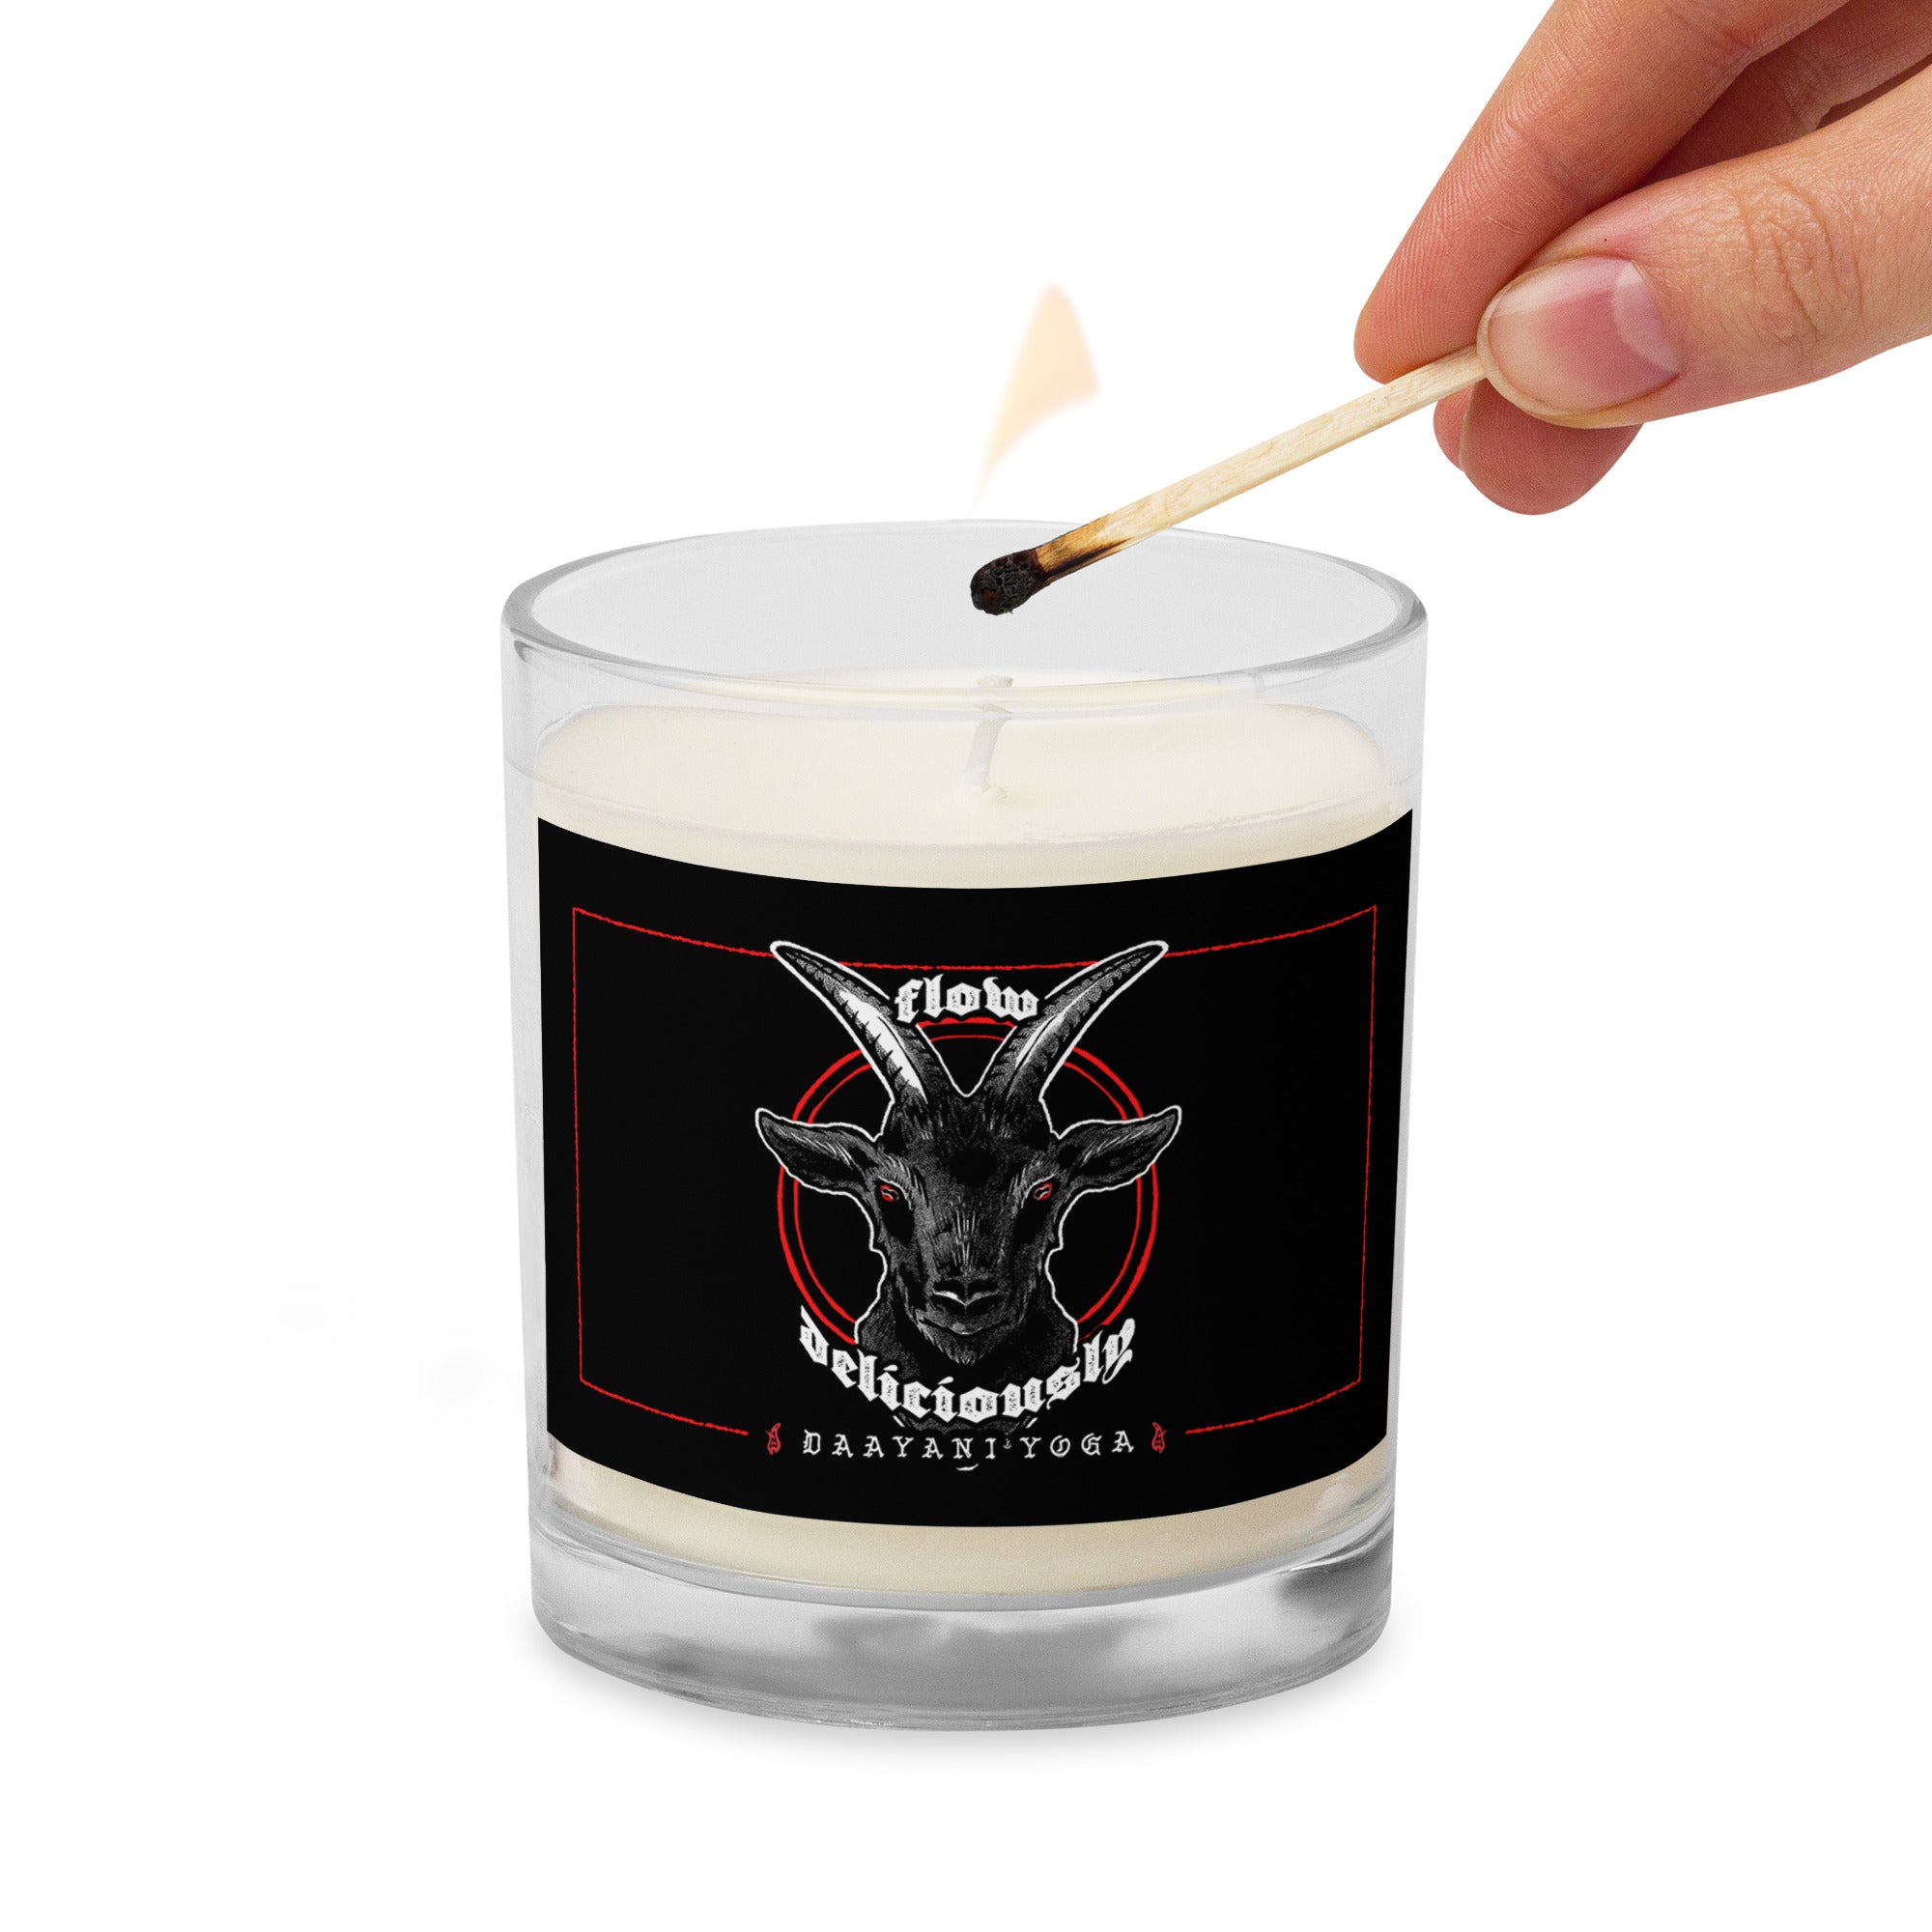 Black Philip Soy Candle